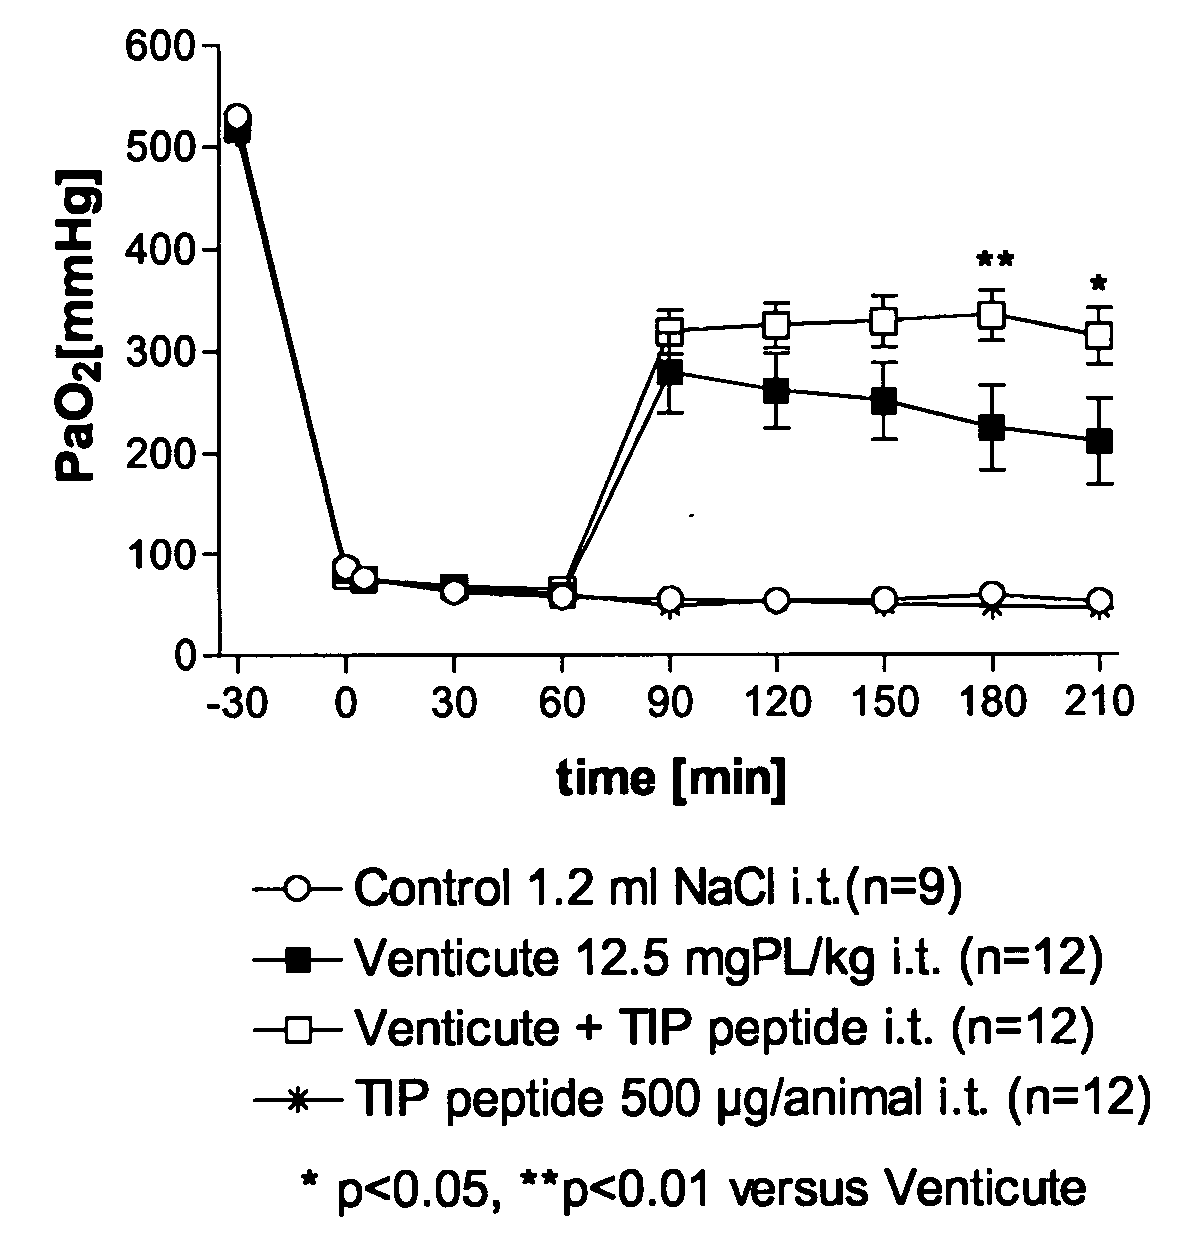 Composition Comprising a Pulmonary Surfactant and a Tnf-Derived Peptide